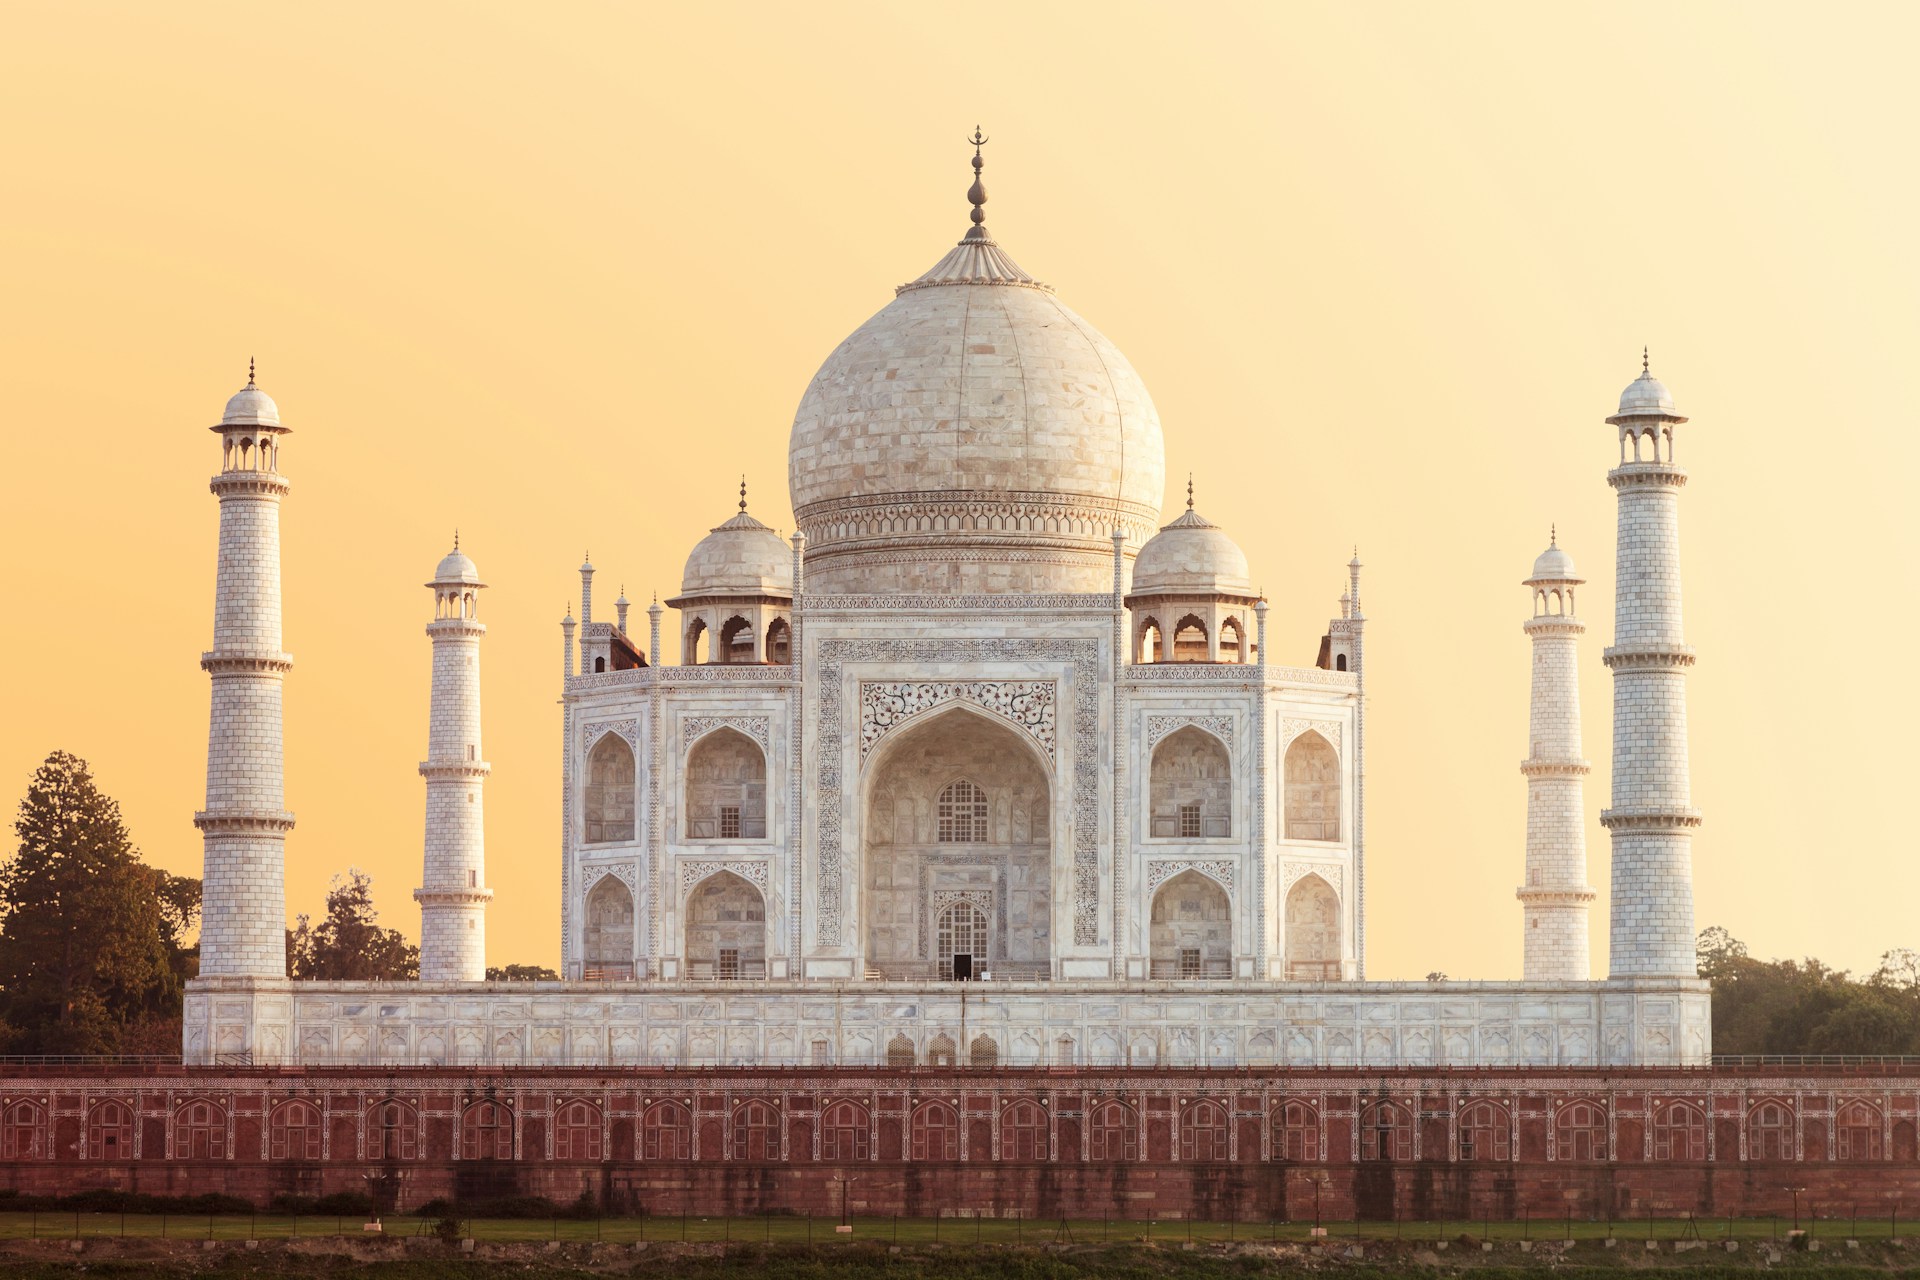 The Taj Mahal, photographed in golden late afternoon light